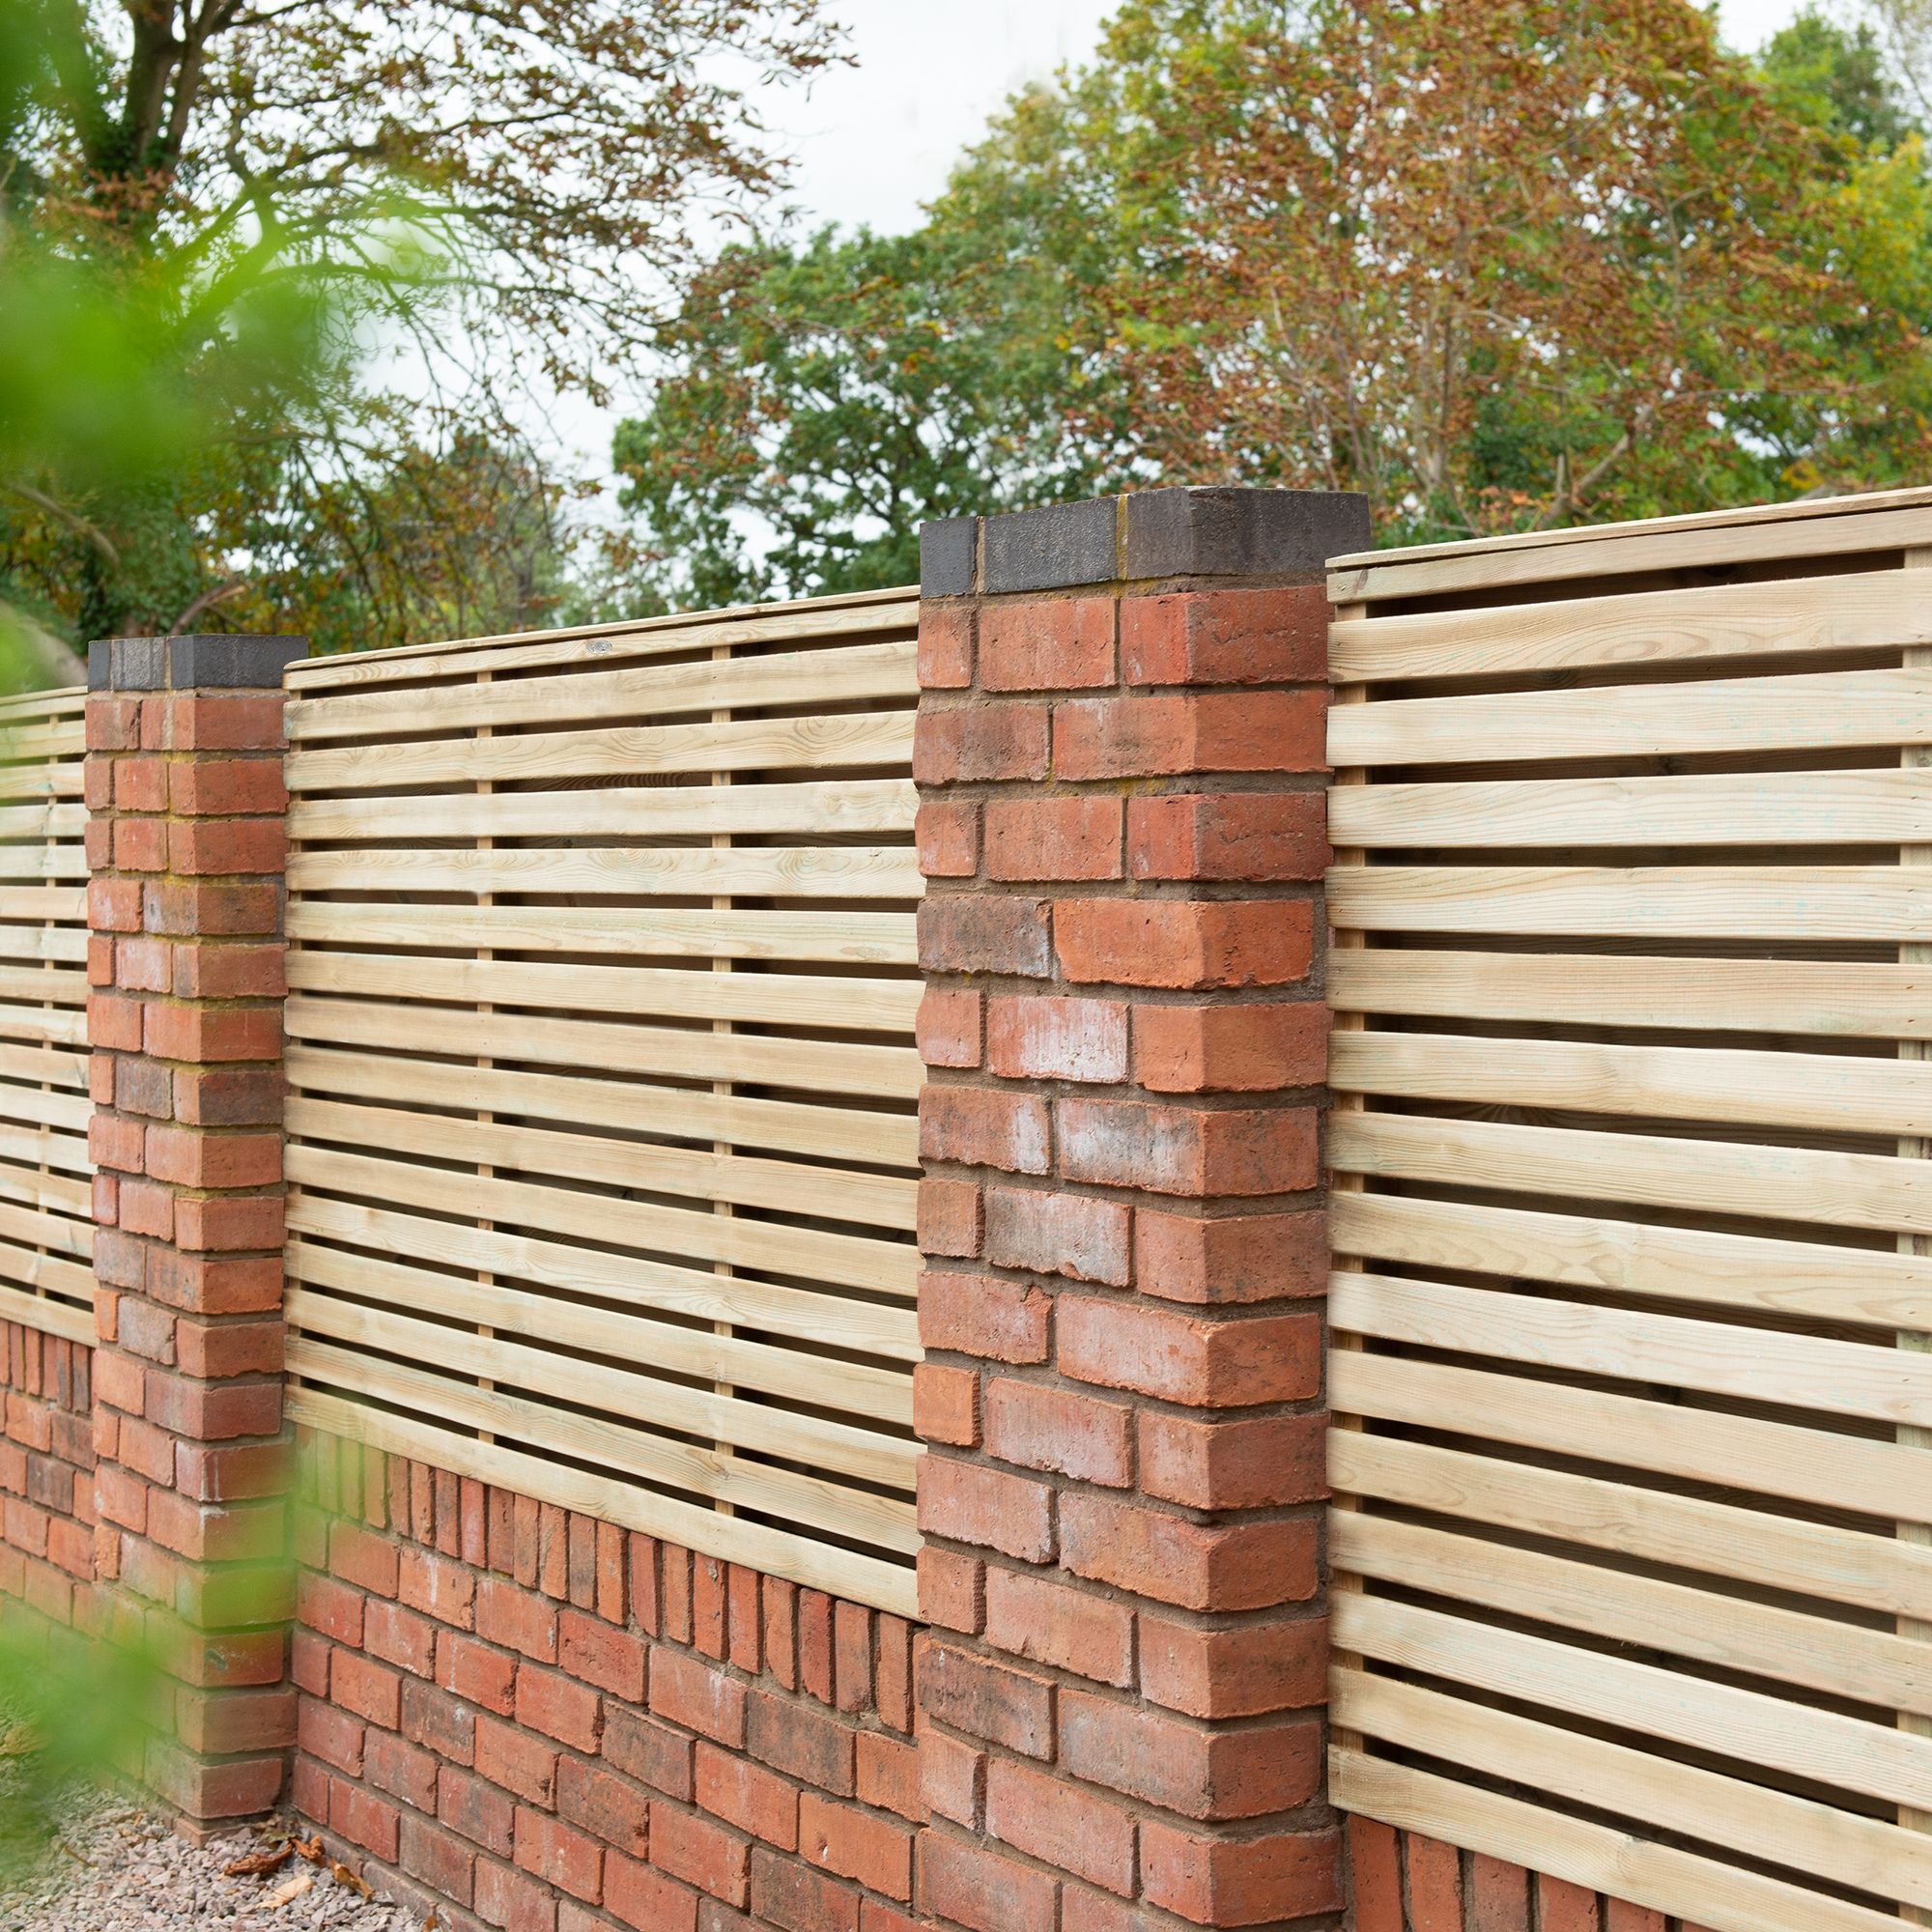 Forest Garden Contemporary Slatted Pressure treated 4ft Wooden Decorative fence panel (W)1.8m (H)1.2m, Pack of 3